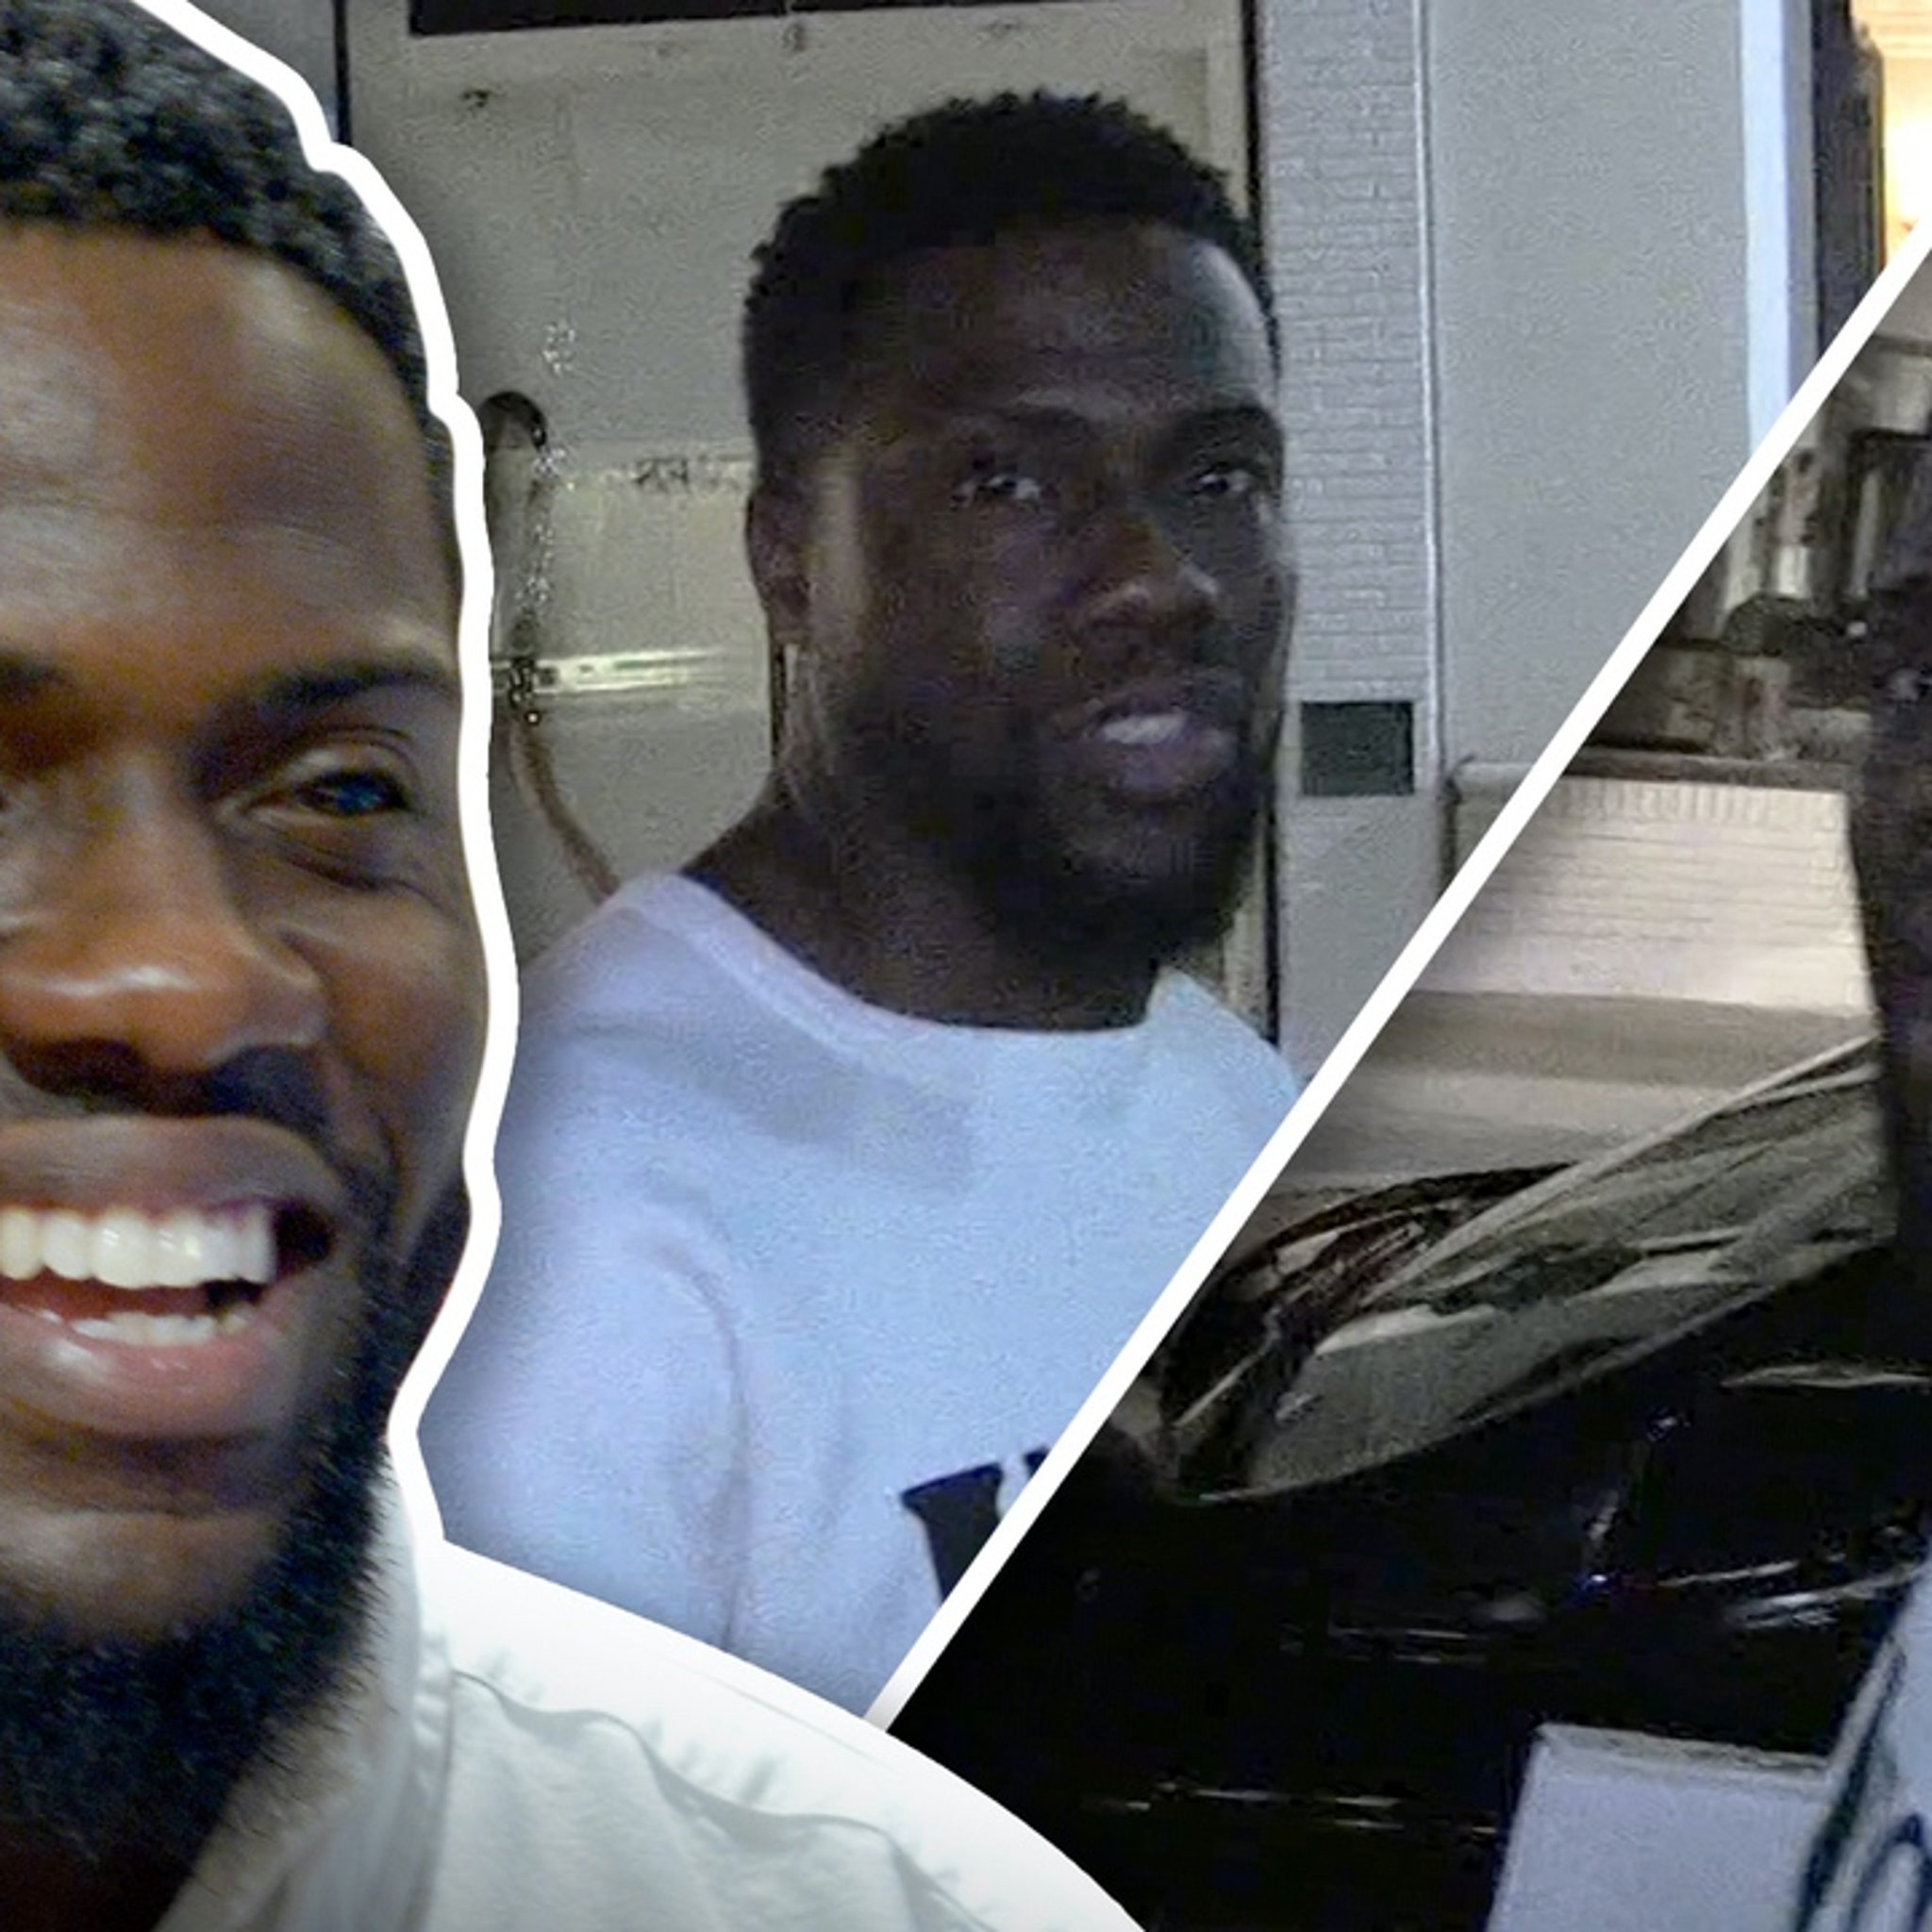 Kevin Hart Roasts Meek Mill's Latest Fit: 'You Look Like A Tennis